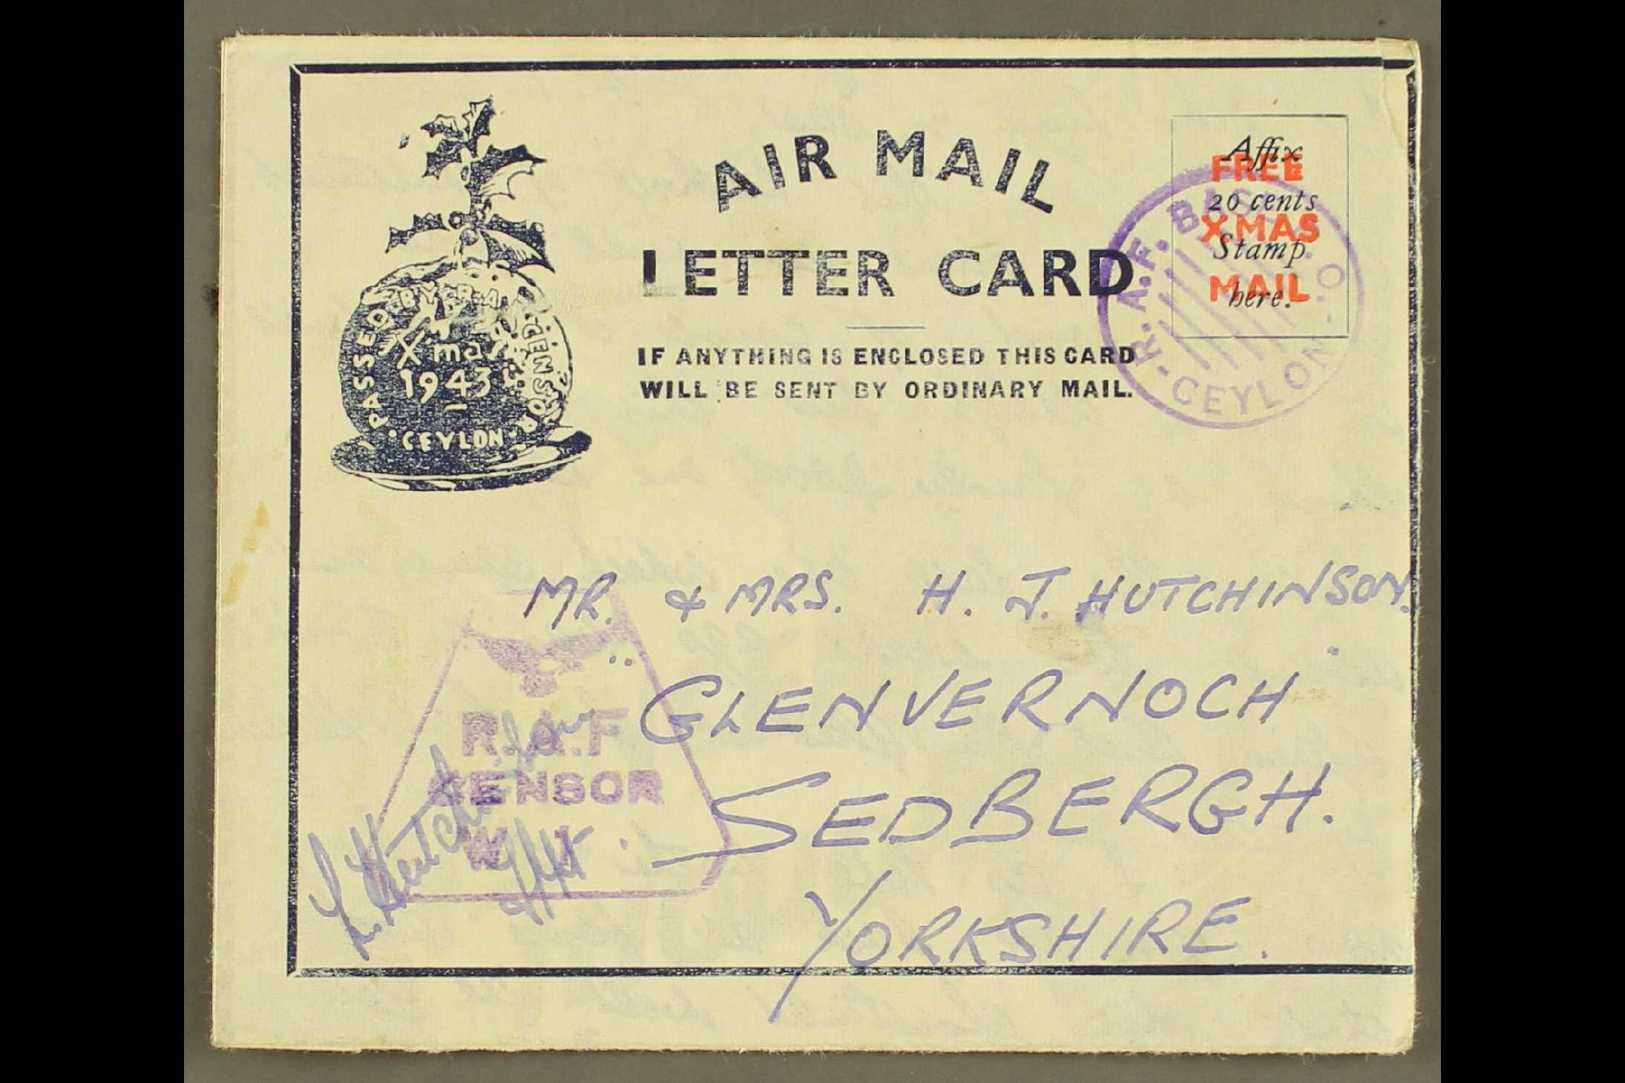 1943 BRITISH MILITARY FORCES CHRISTMAS AEROGRAMME  (Kessler 188) "Affix 20 Cents Stamp Here" From An Airman At R.A.F. Ce - Ceilán (...-1947)